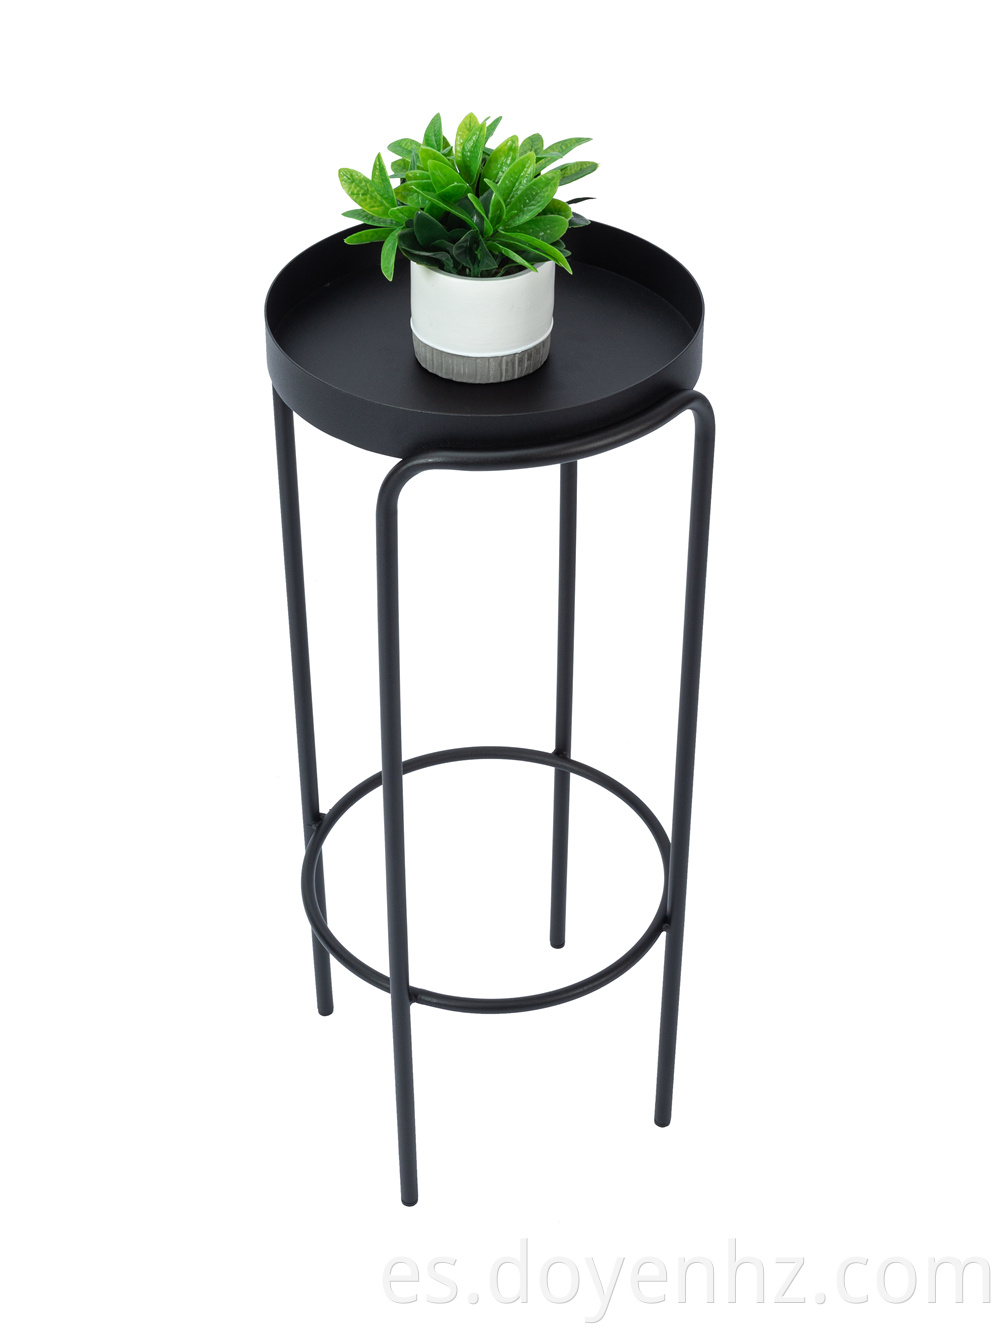 Metal Round Plant Stand for Pot Holder